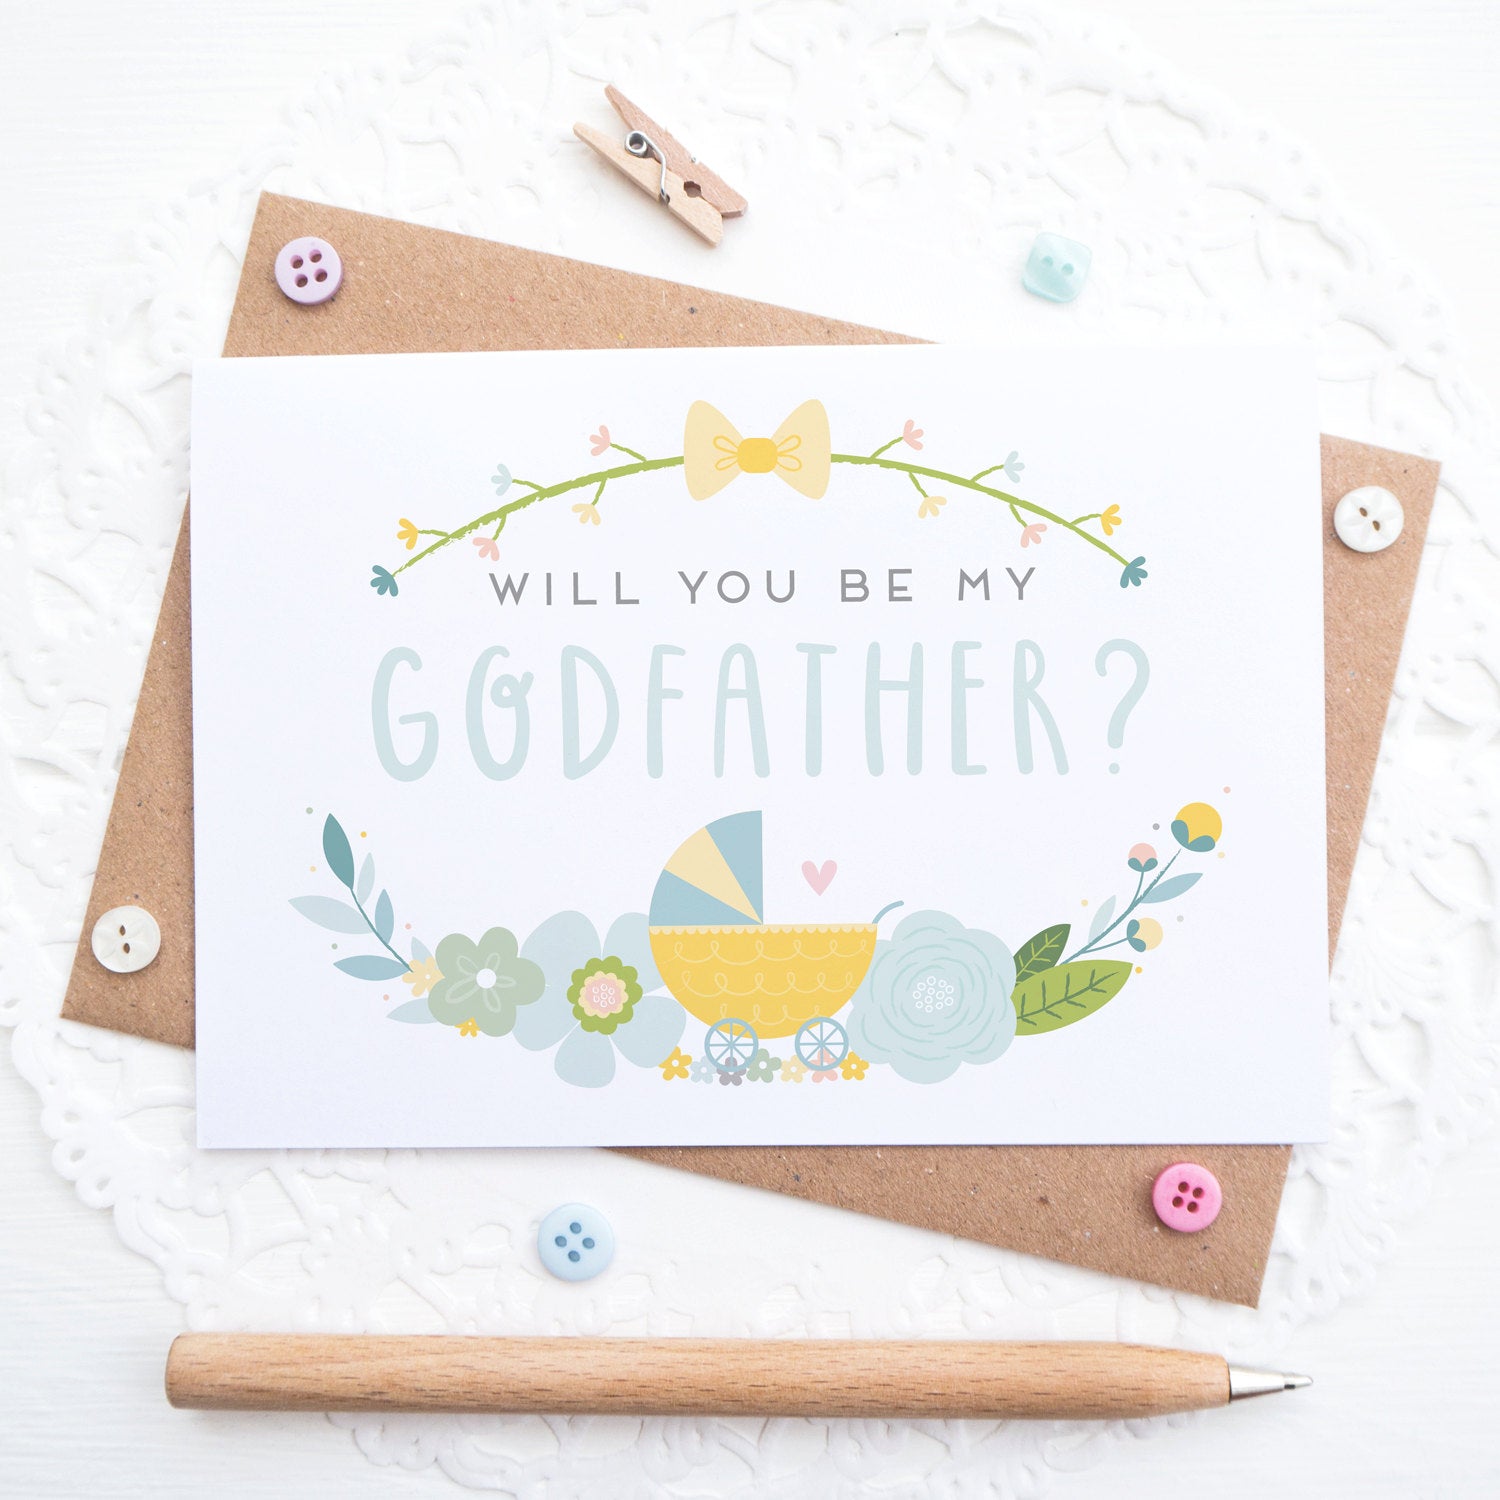 Will you be my Godfather card in blue